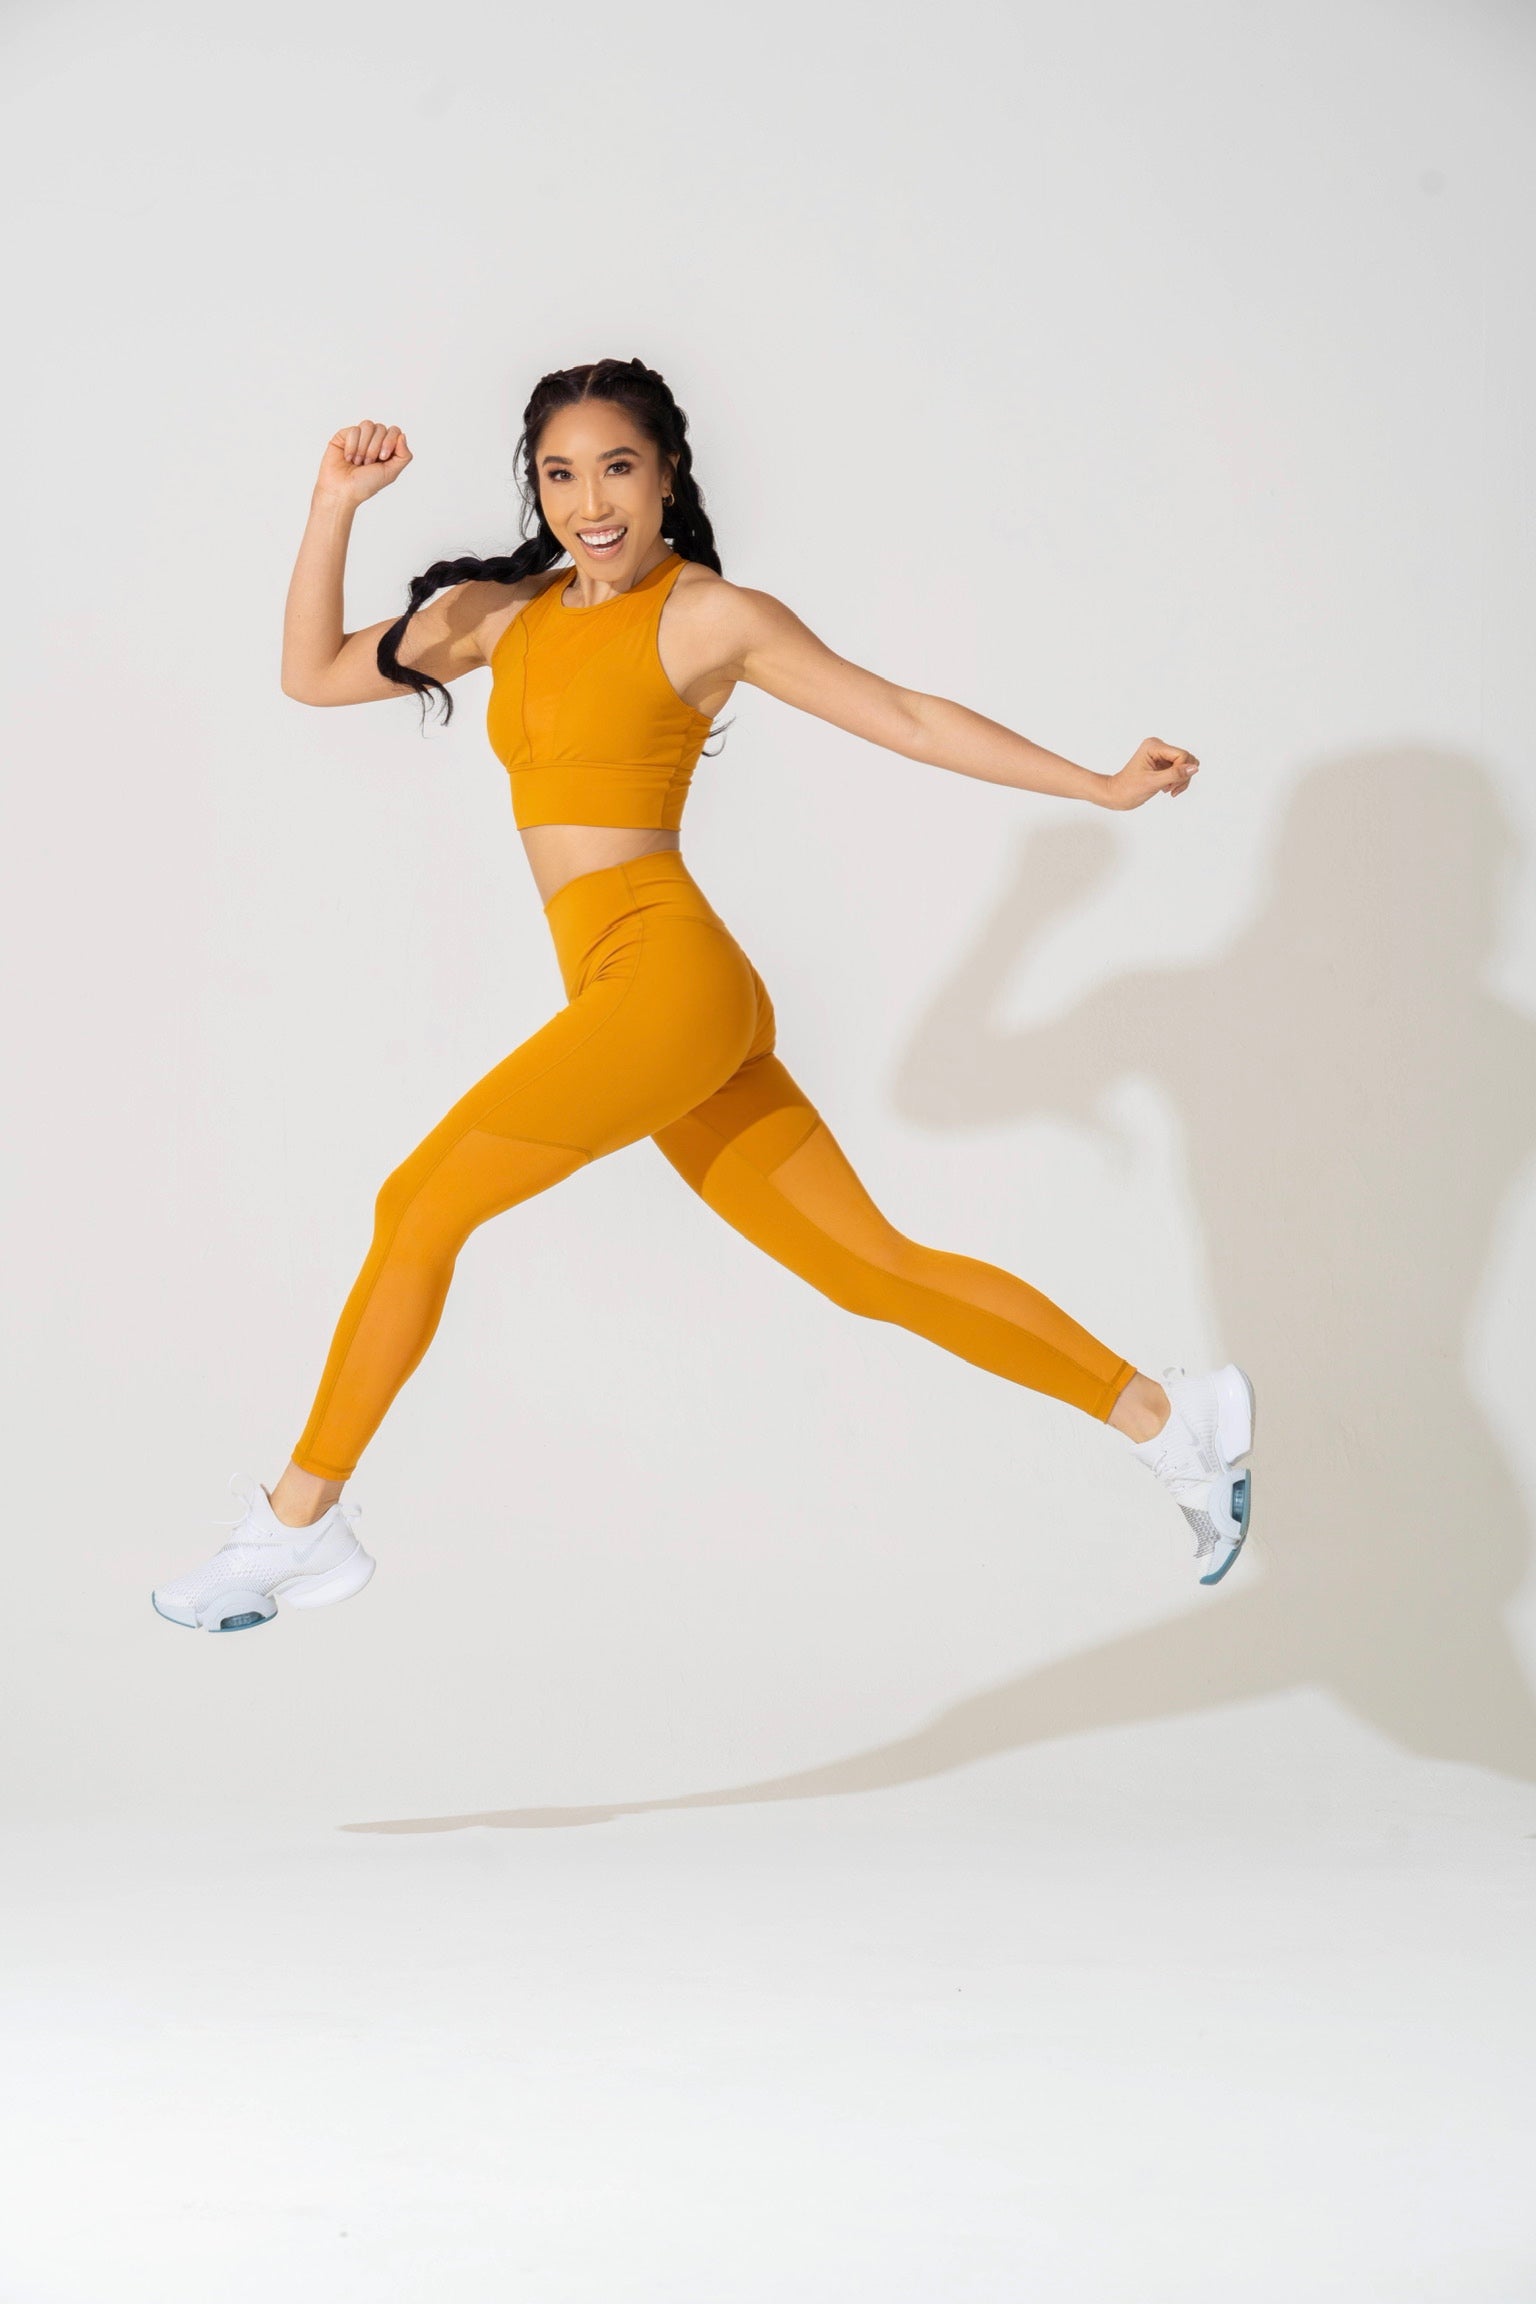 Cassey Ho in a two-piece orange workout outfit caught mid air in a jump step. 